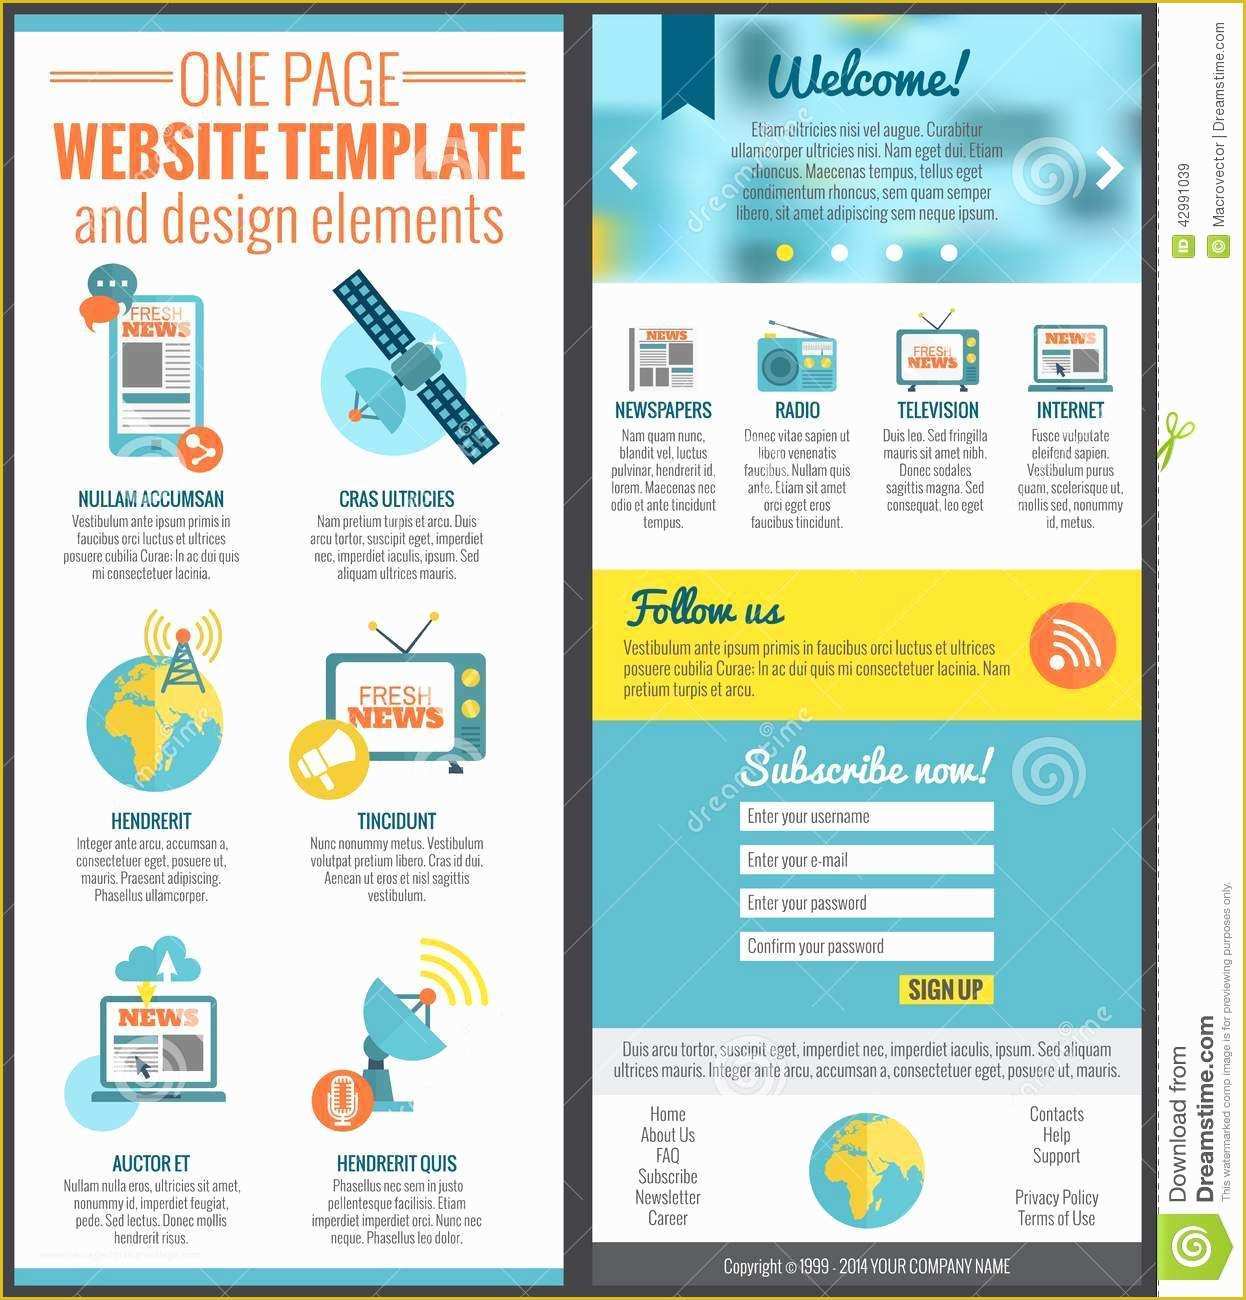 One Page Template Free Of E Page Web Site Template Stock Vector Image Of Call